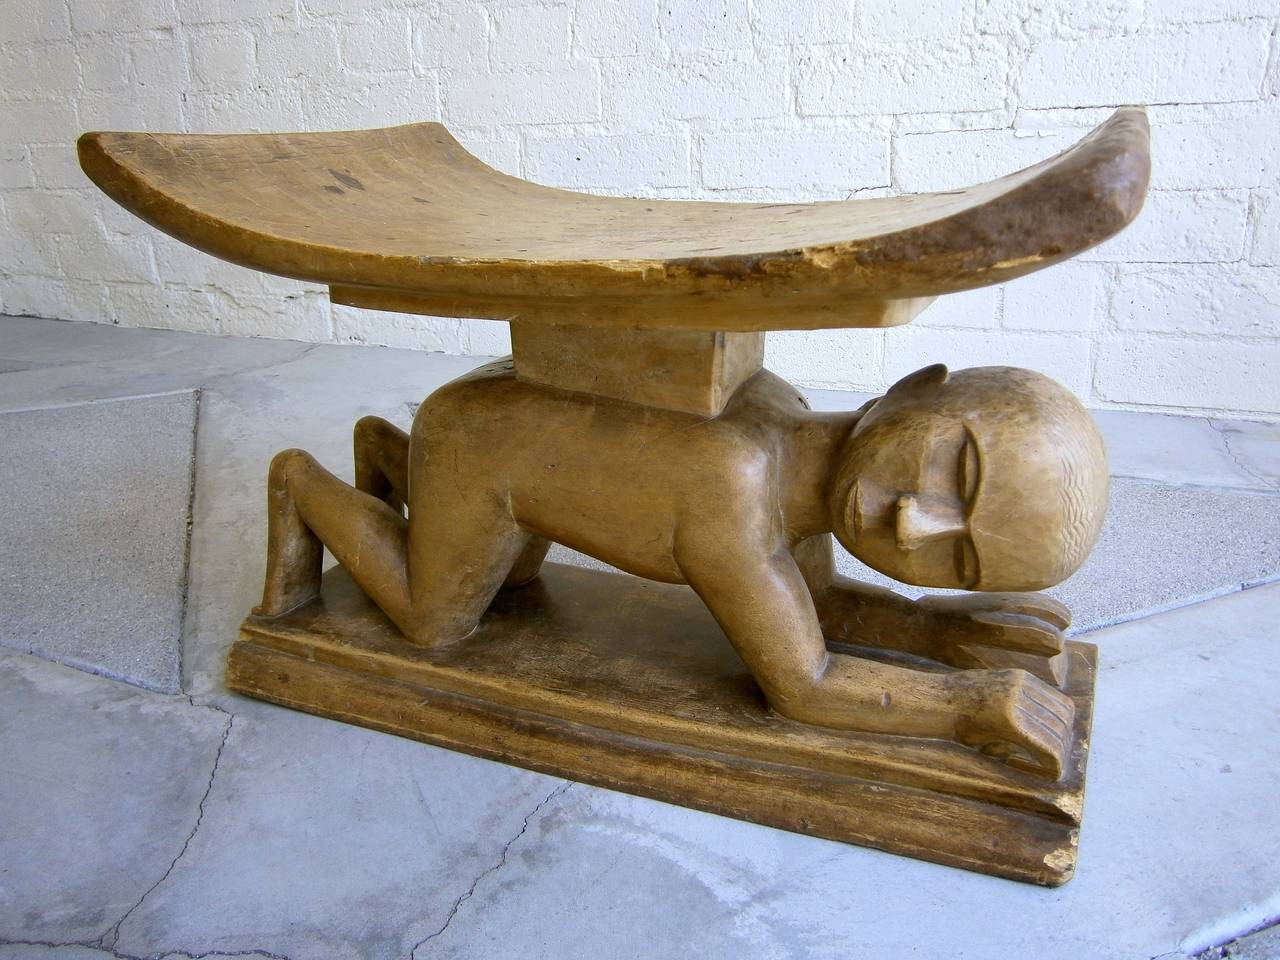 A rarely seen figural Ashanti Stool. Made of African hardwood and carved out of a single block, these stools have deep spiritual significance to the Ashanti people. The belief is that the stool is the 